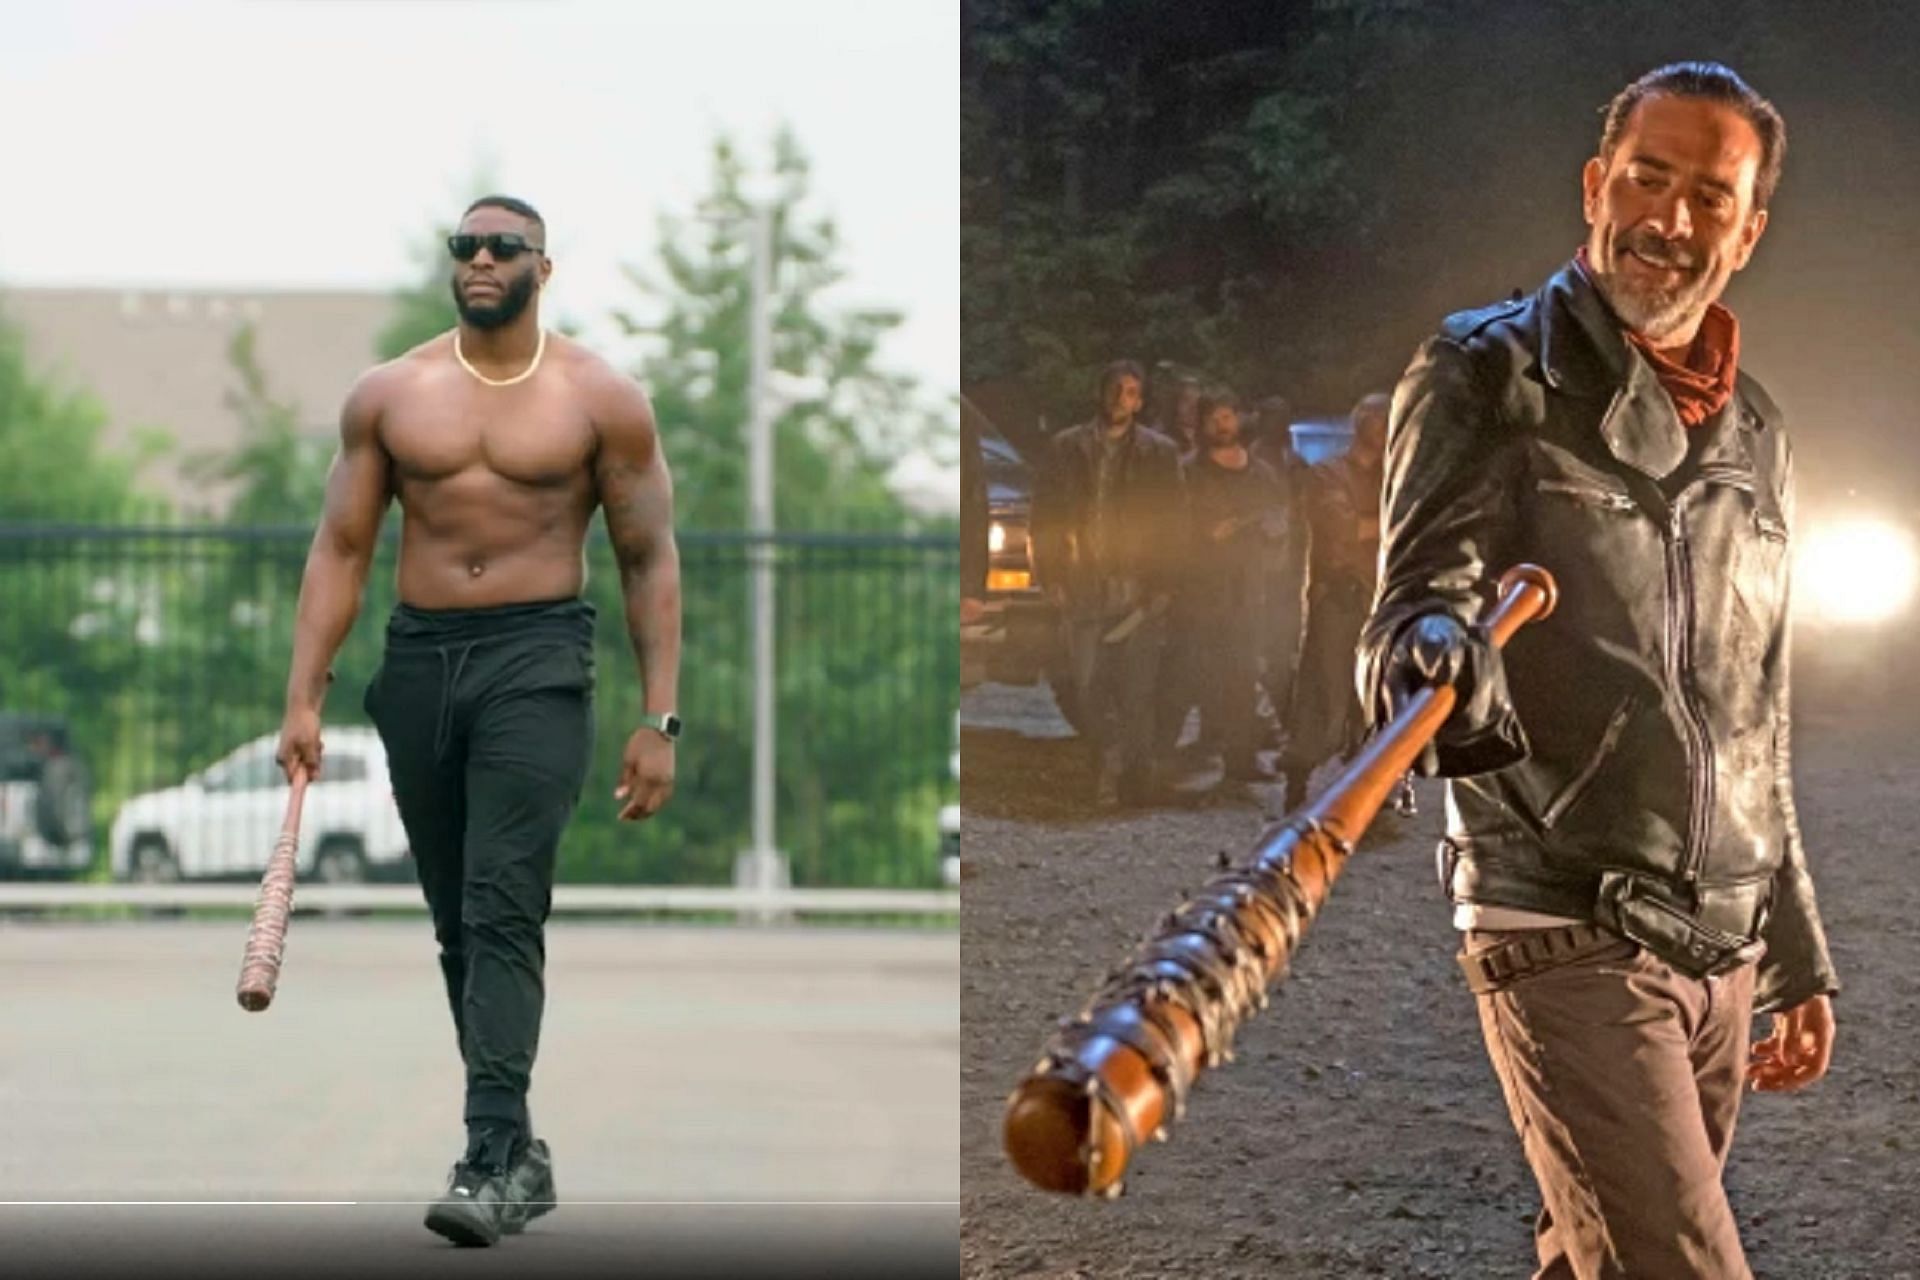 Micheal Clemons draws comparisons with Negan from Walking Dead after jacked training camp look goes viral